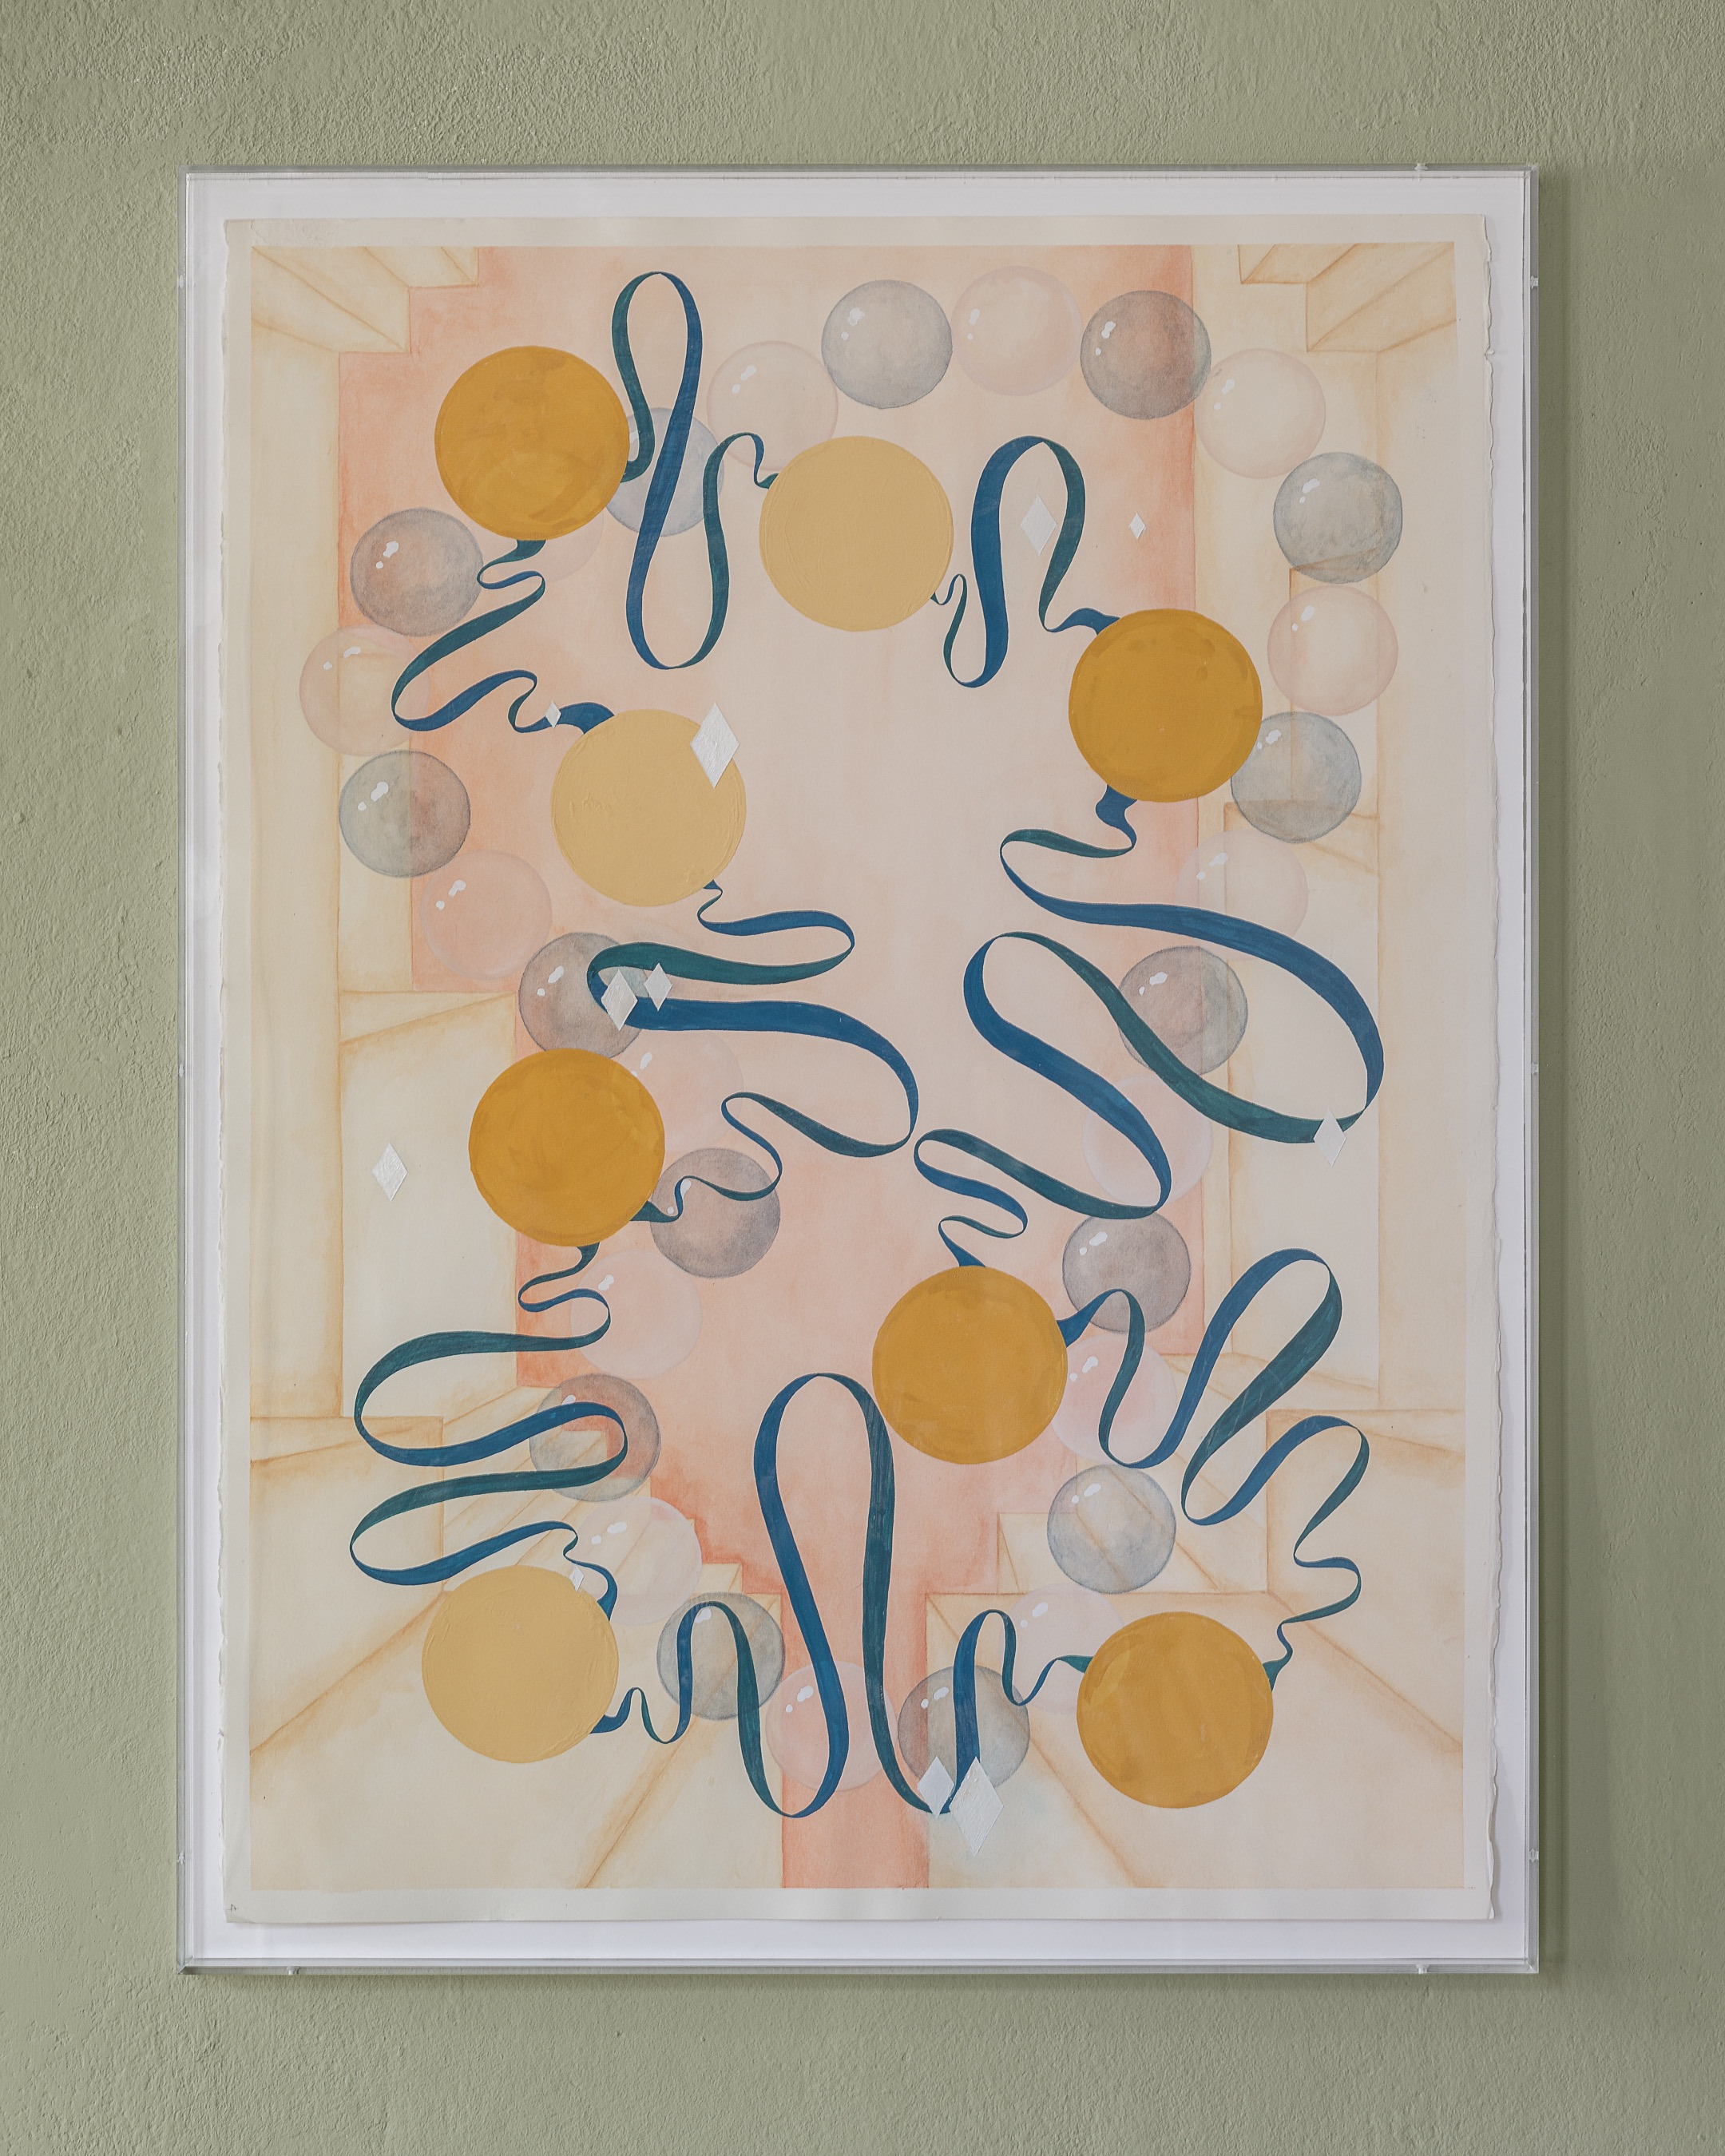 Tai Shani, Outsides & Erotics (Orange), 2021, Watercolor on paper, 56x76 cm (60 x 80 cm framed) Courtesy: The Artist and Clima, Milan